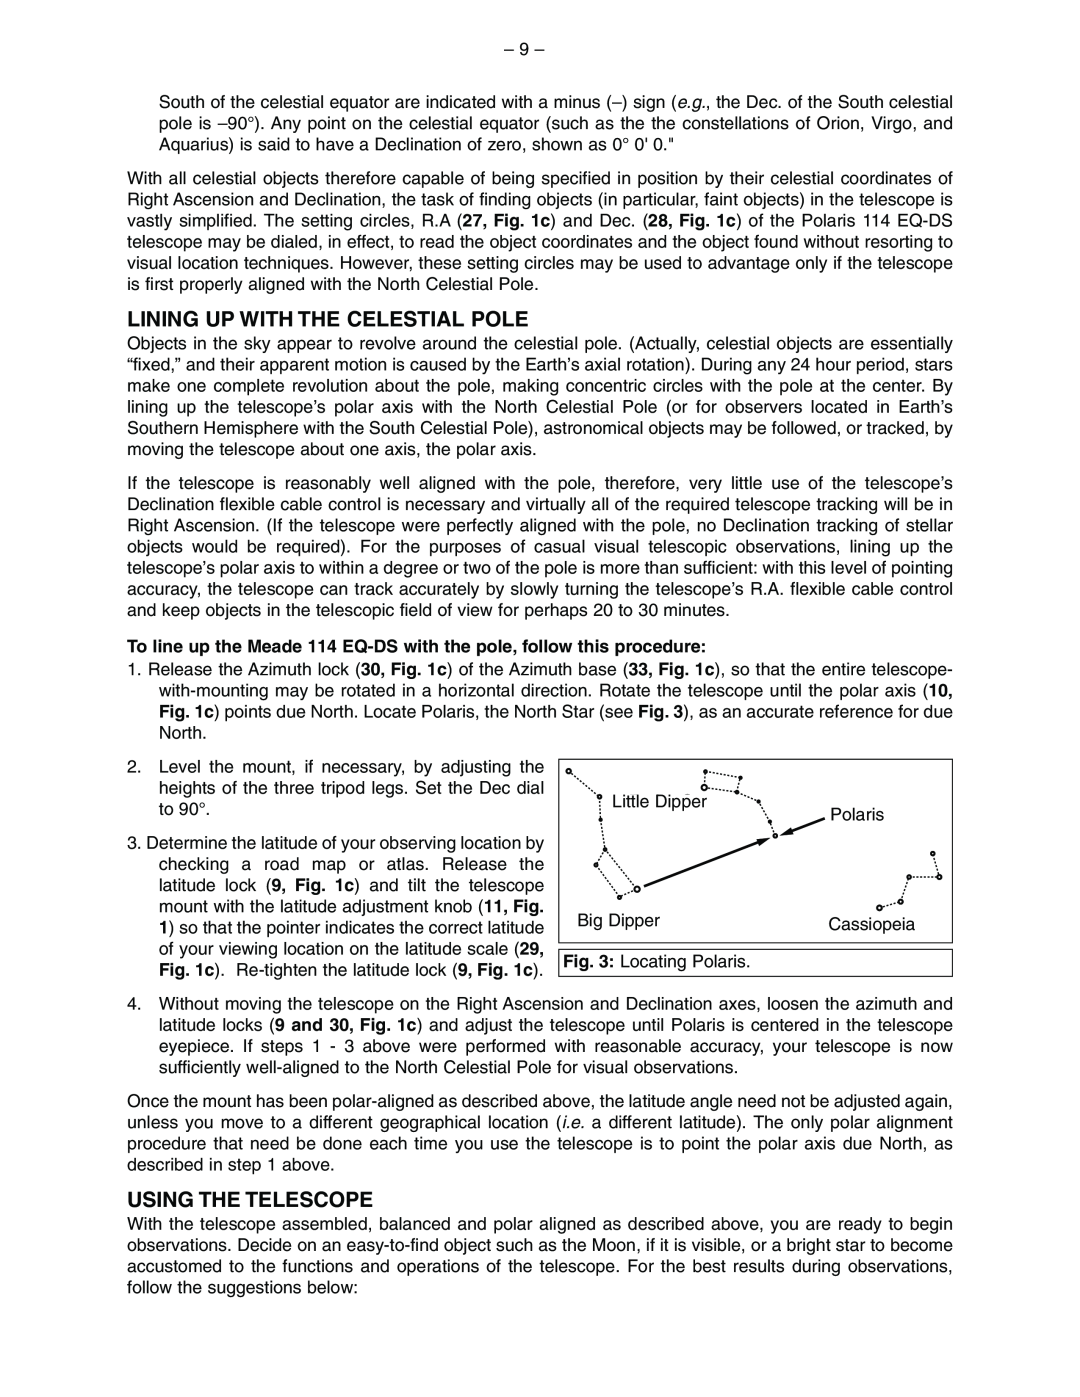 Meade 114 EQ-DS instruction manual Lining Up With The Celestial Pole, Using The Telescope 